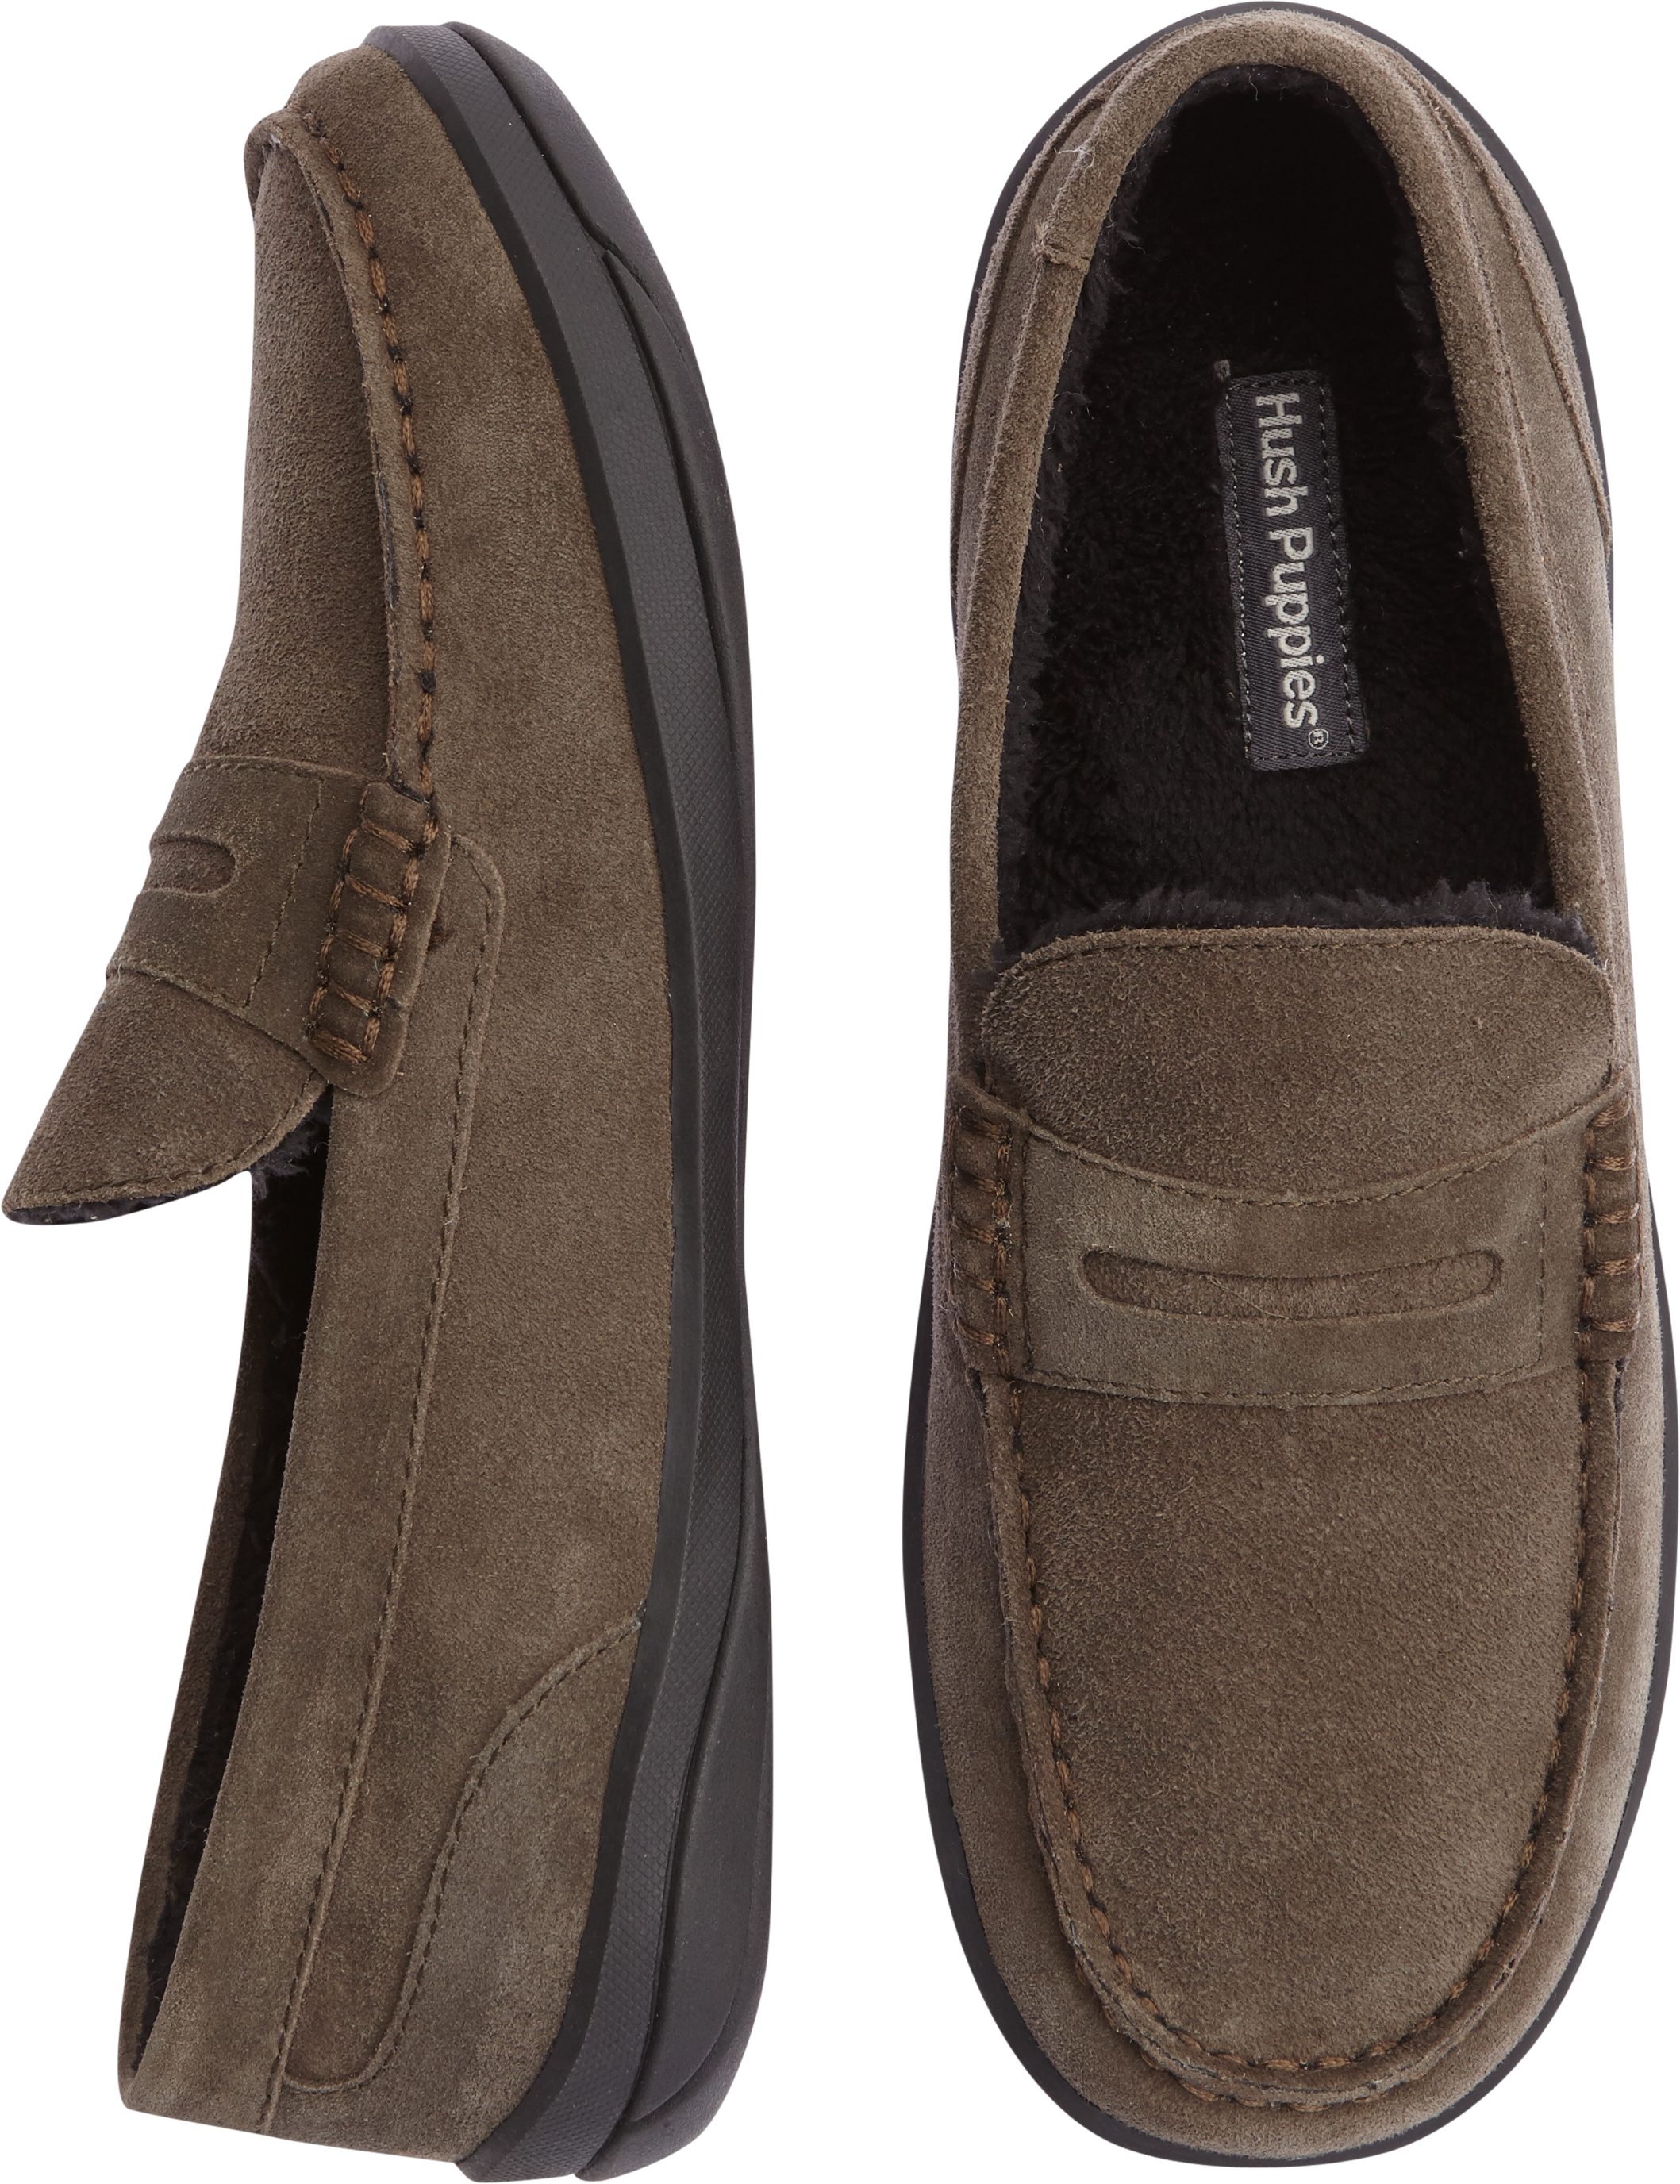 Hush Puppies Taupe Suede Penny Loafer | Men's